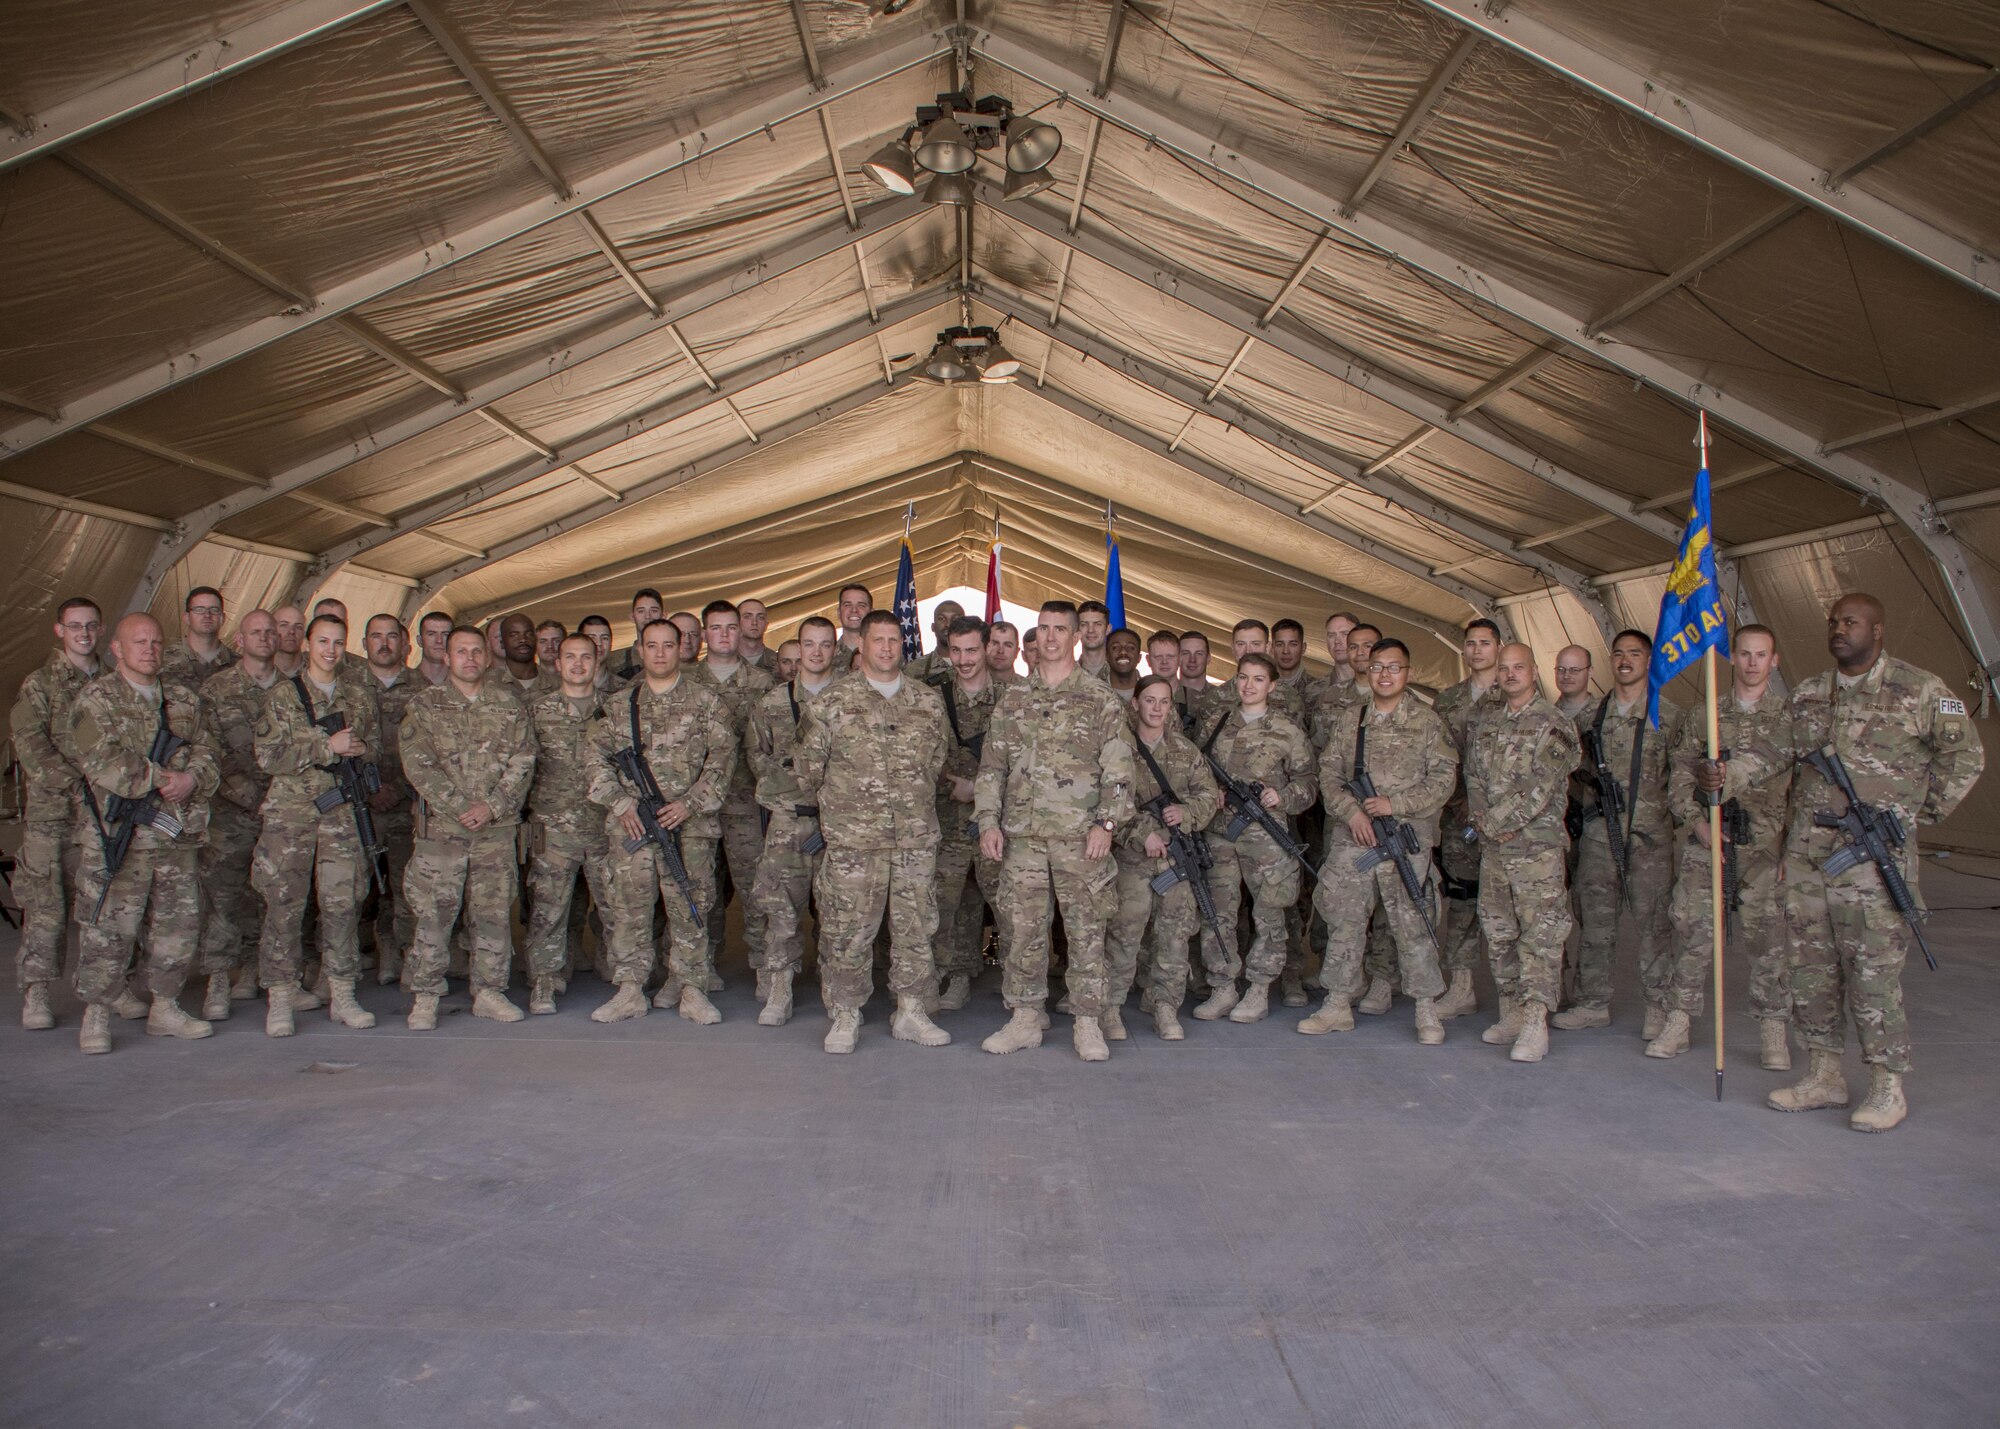 370th Air Expeditionary Advisory Group Detachment 1 Airmen pose for a photograph after the change of command ceremony, Jan. 8, 2017 at Al Asad Air Base, Iraq. (U.S. Air Force photo/Senior Airman Andrew Park)